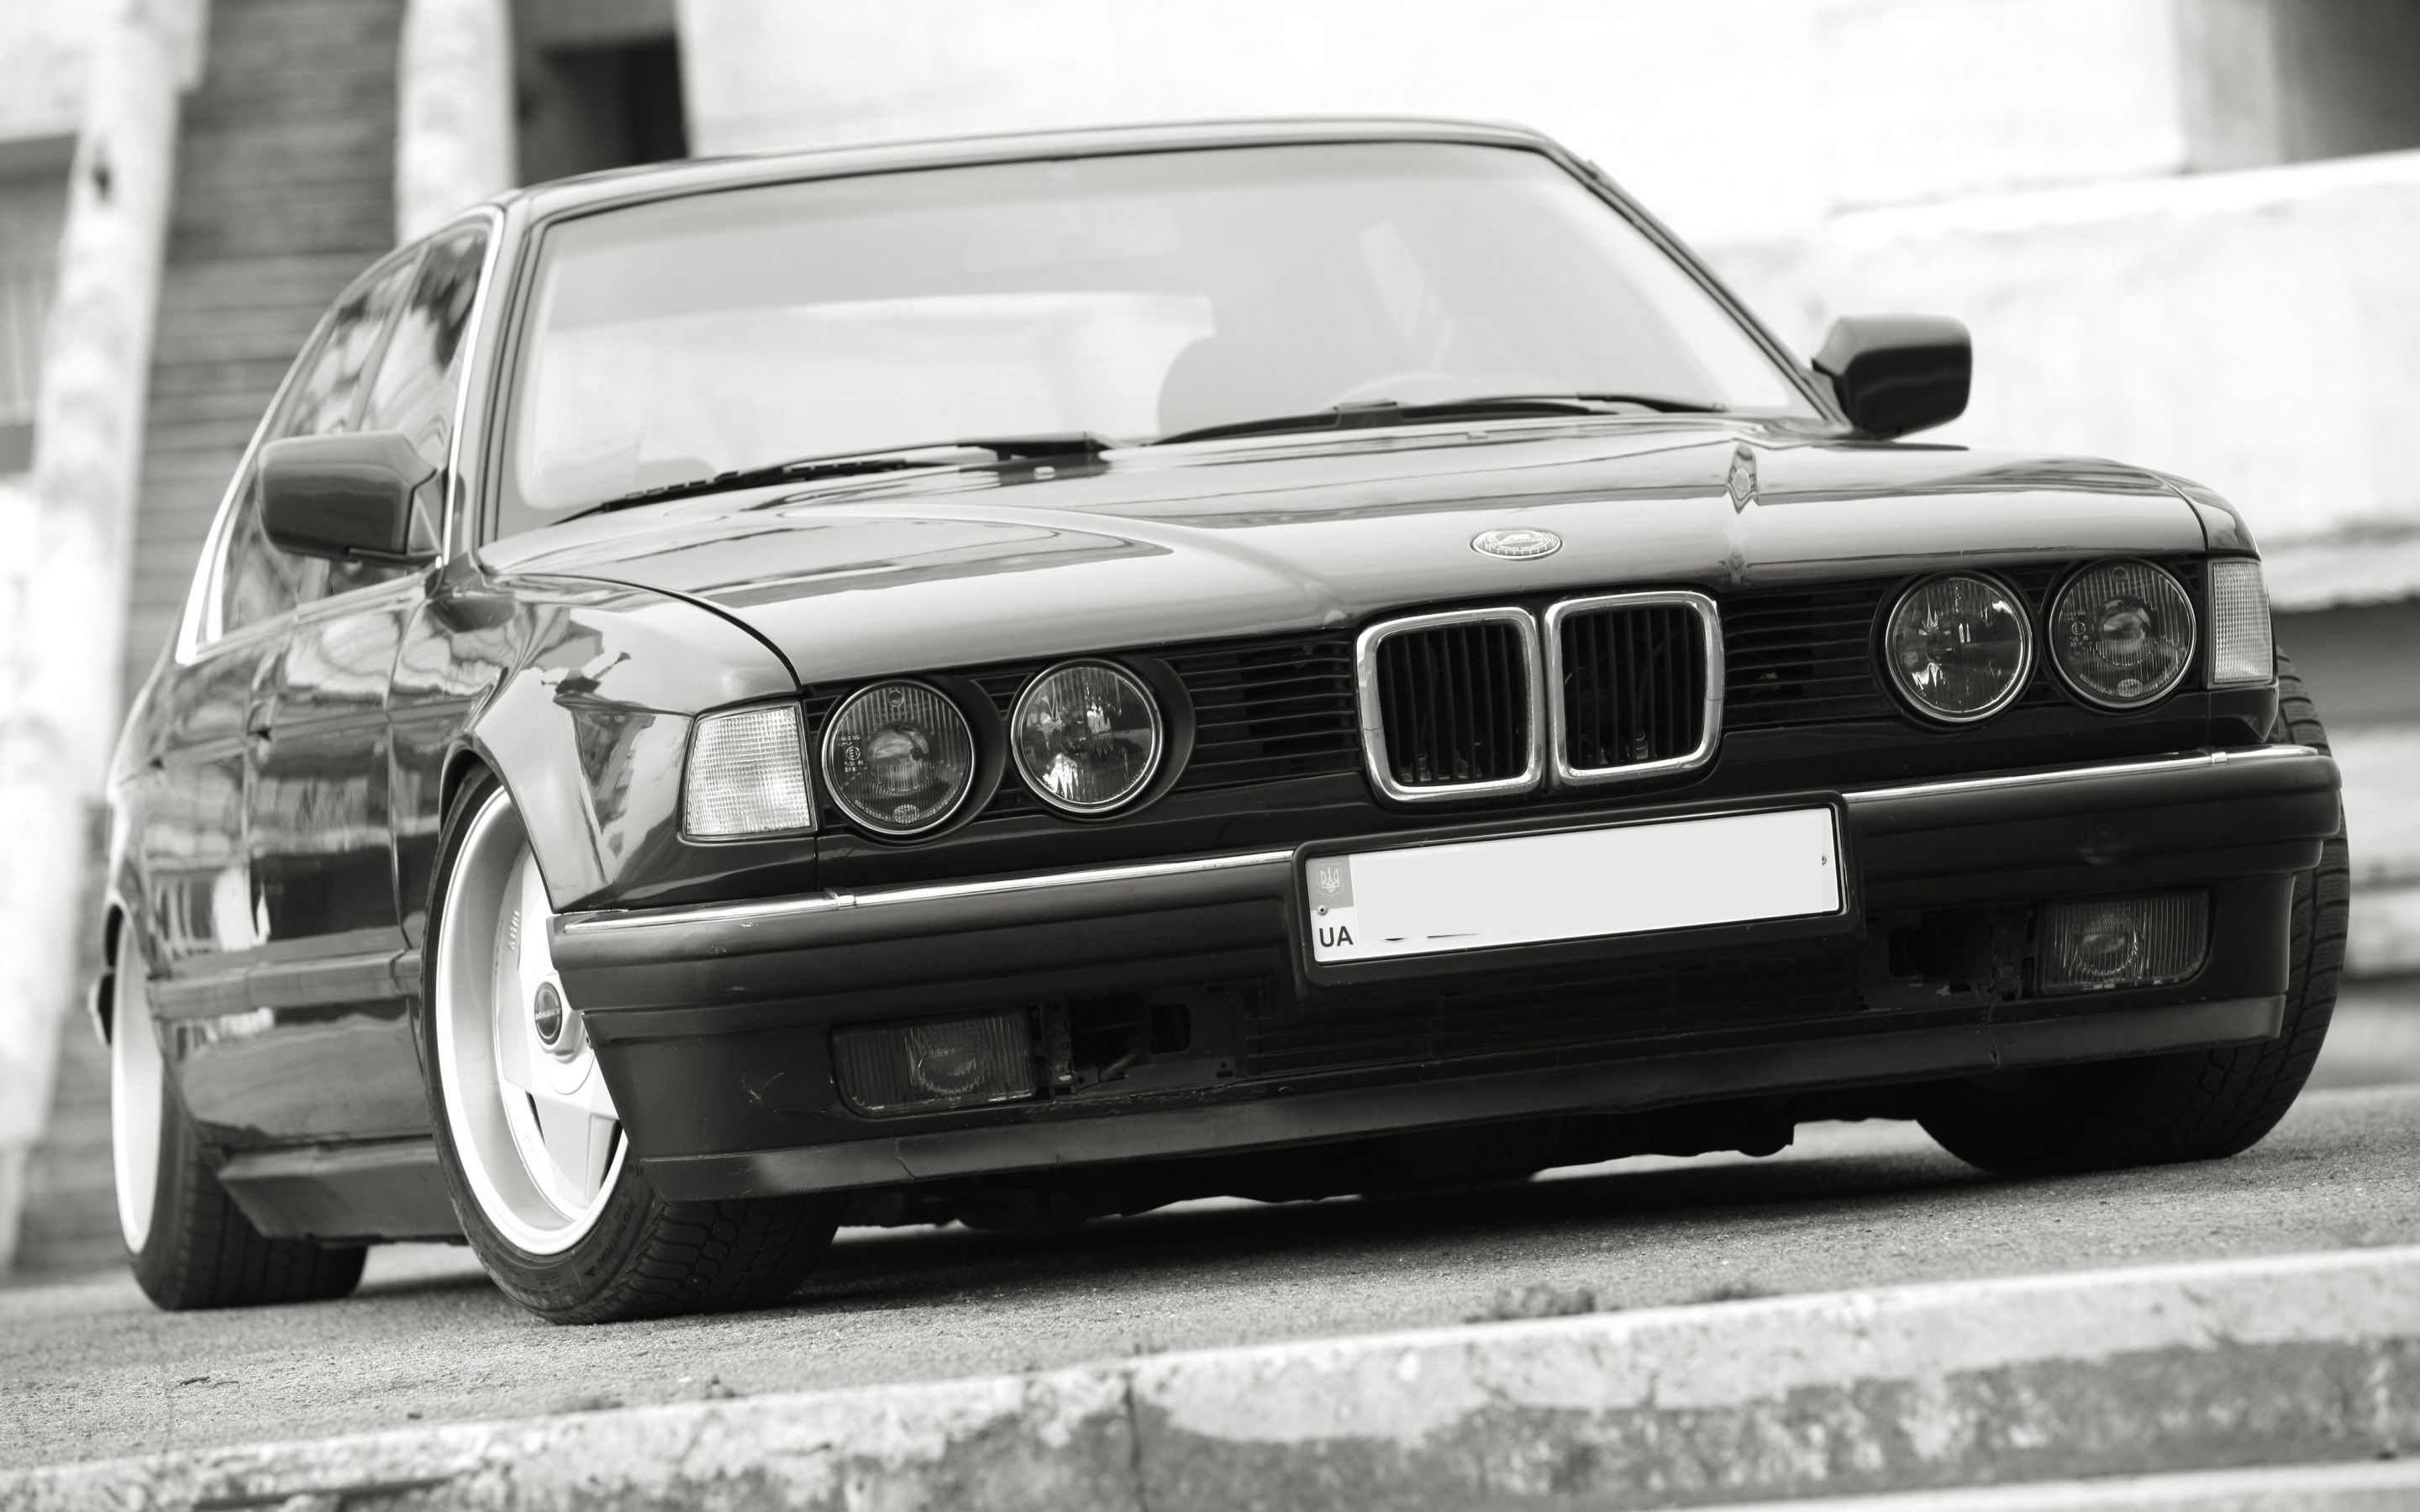 Download wallpaper black and white, BMW, dark red, E section bmw in resolution 2880x1800